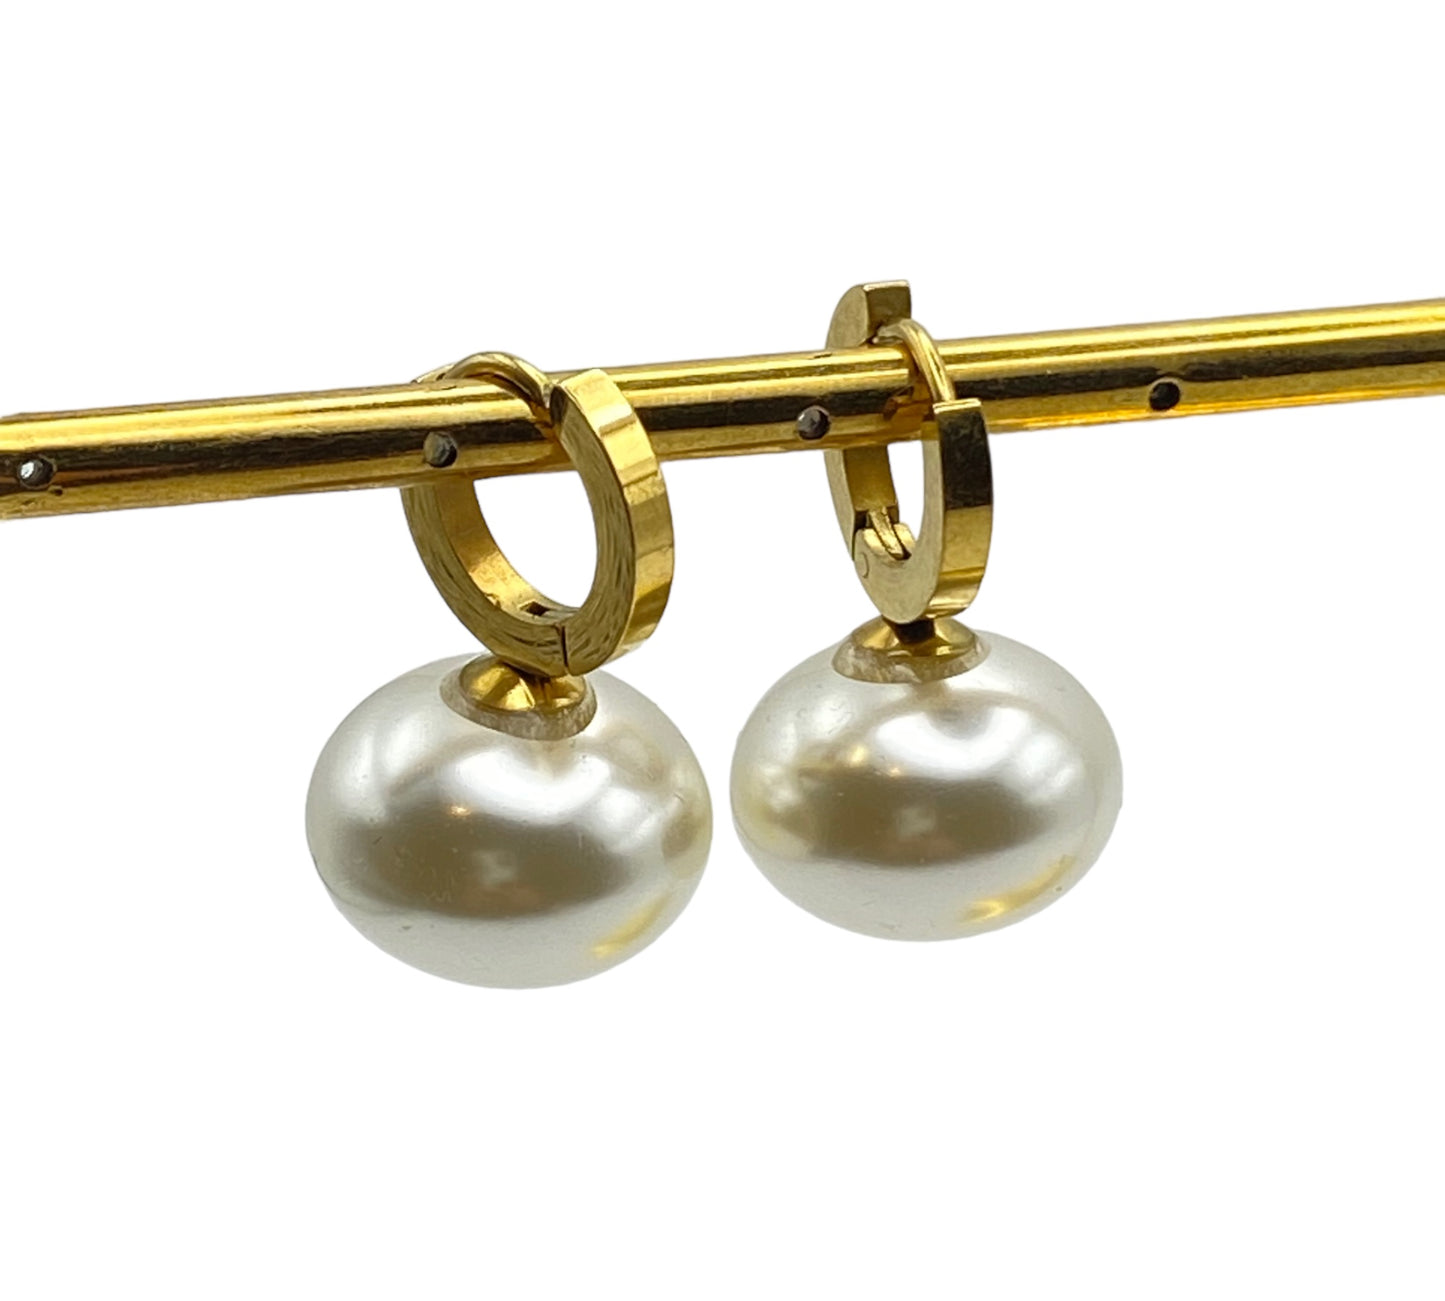 "PHOENIX" gold plated hoop earrings with a single statement pearl